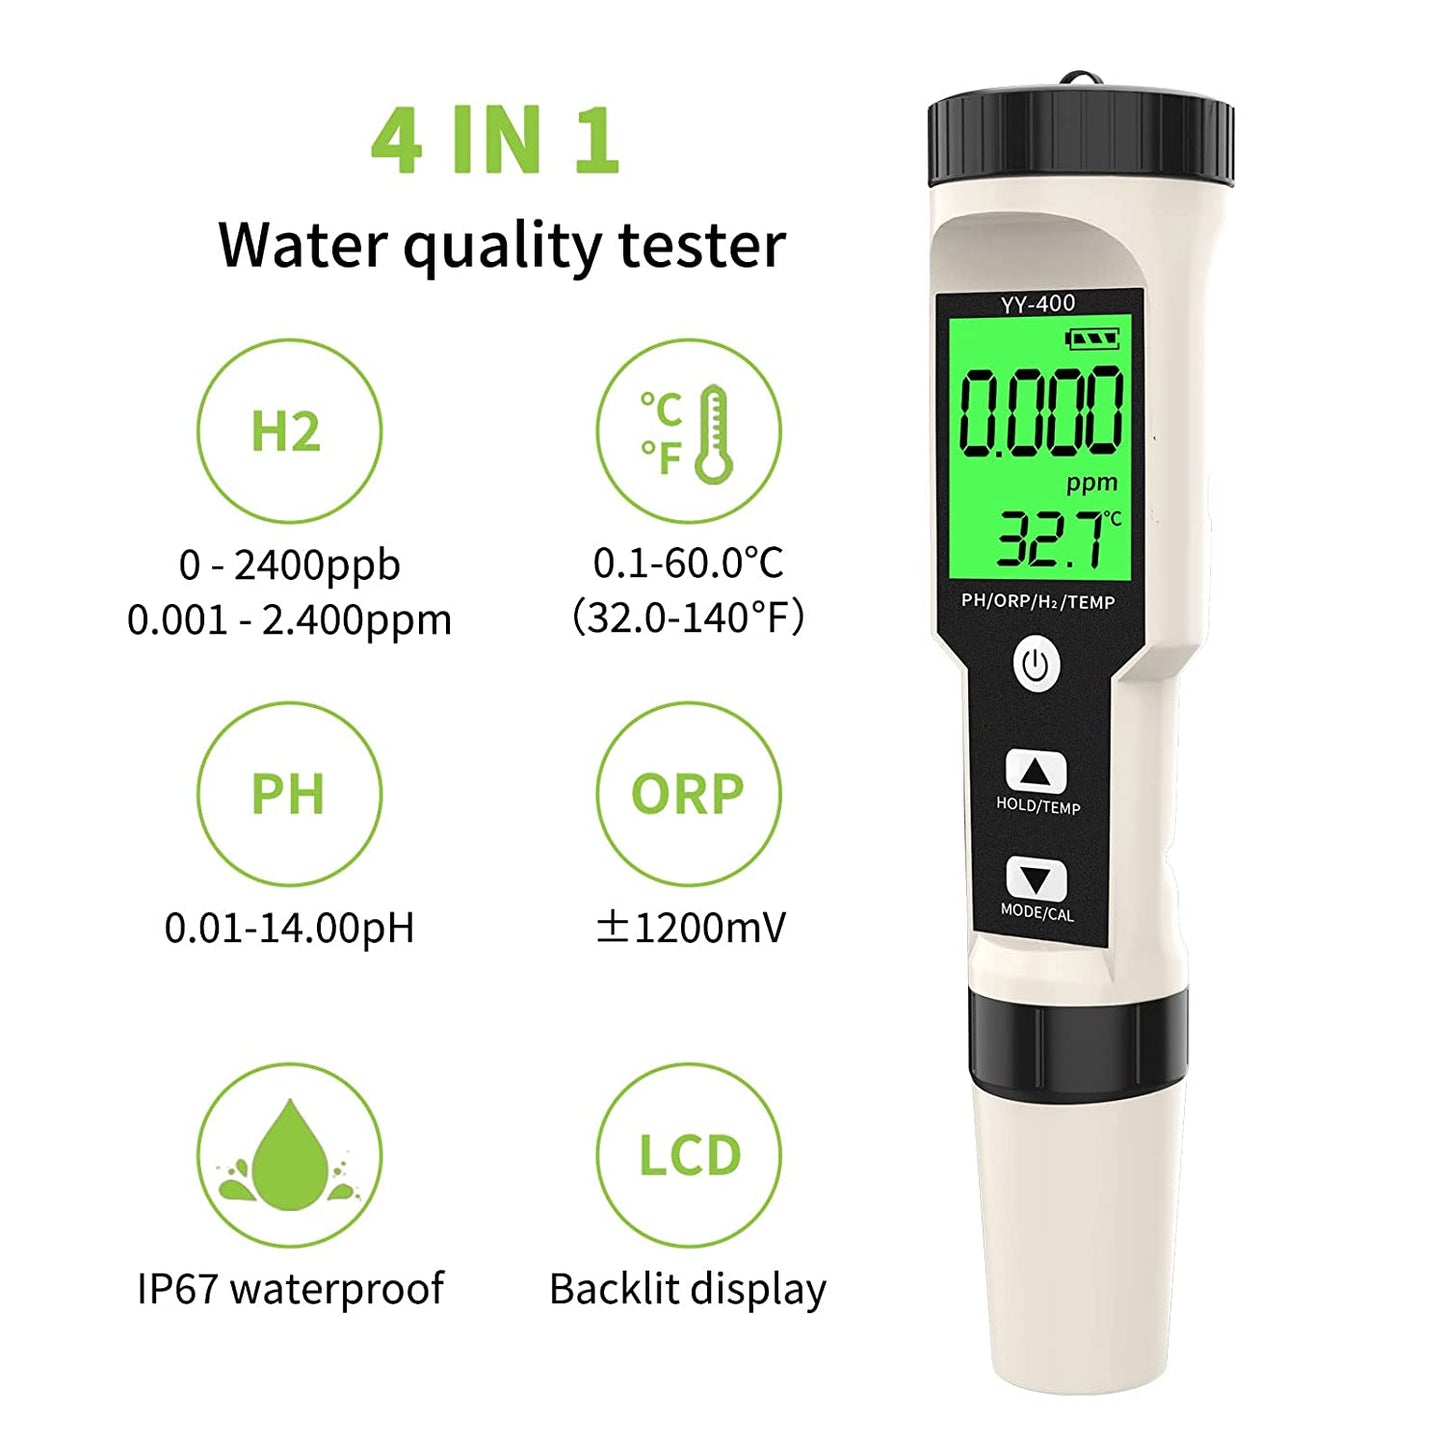 YIERYI pH Meter, Digital 4-in-1 pH ORP H2 Temp Meter, Hydrogen Tester with ATC, 0.01 Resolution High Accuracy pH Tester for Drinking Water